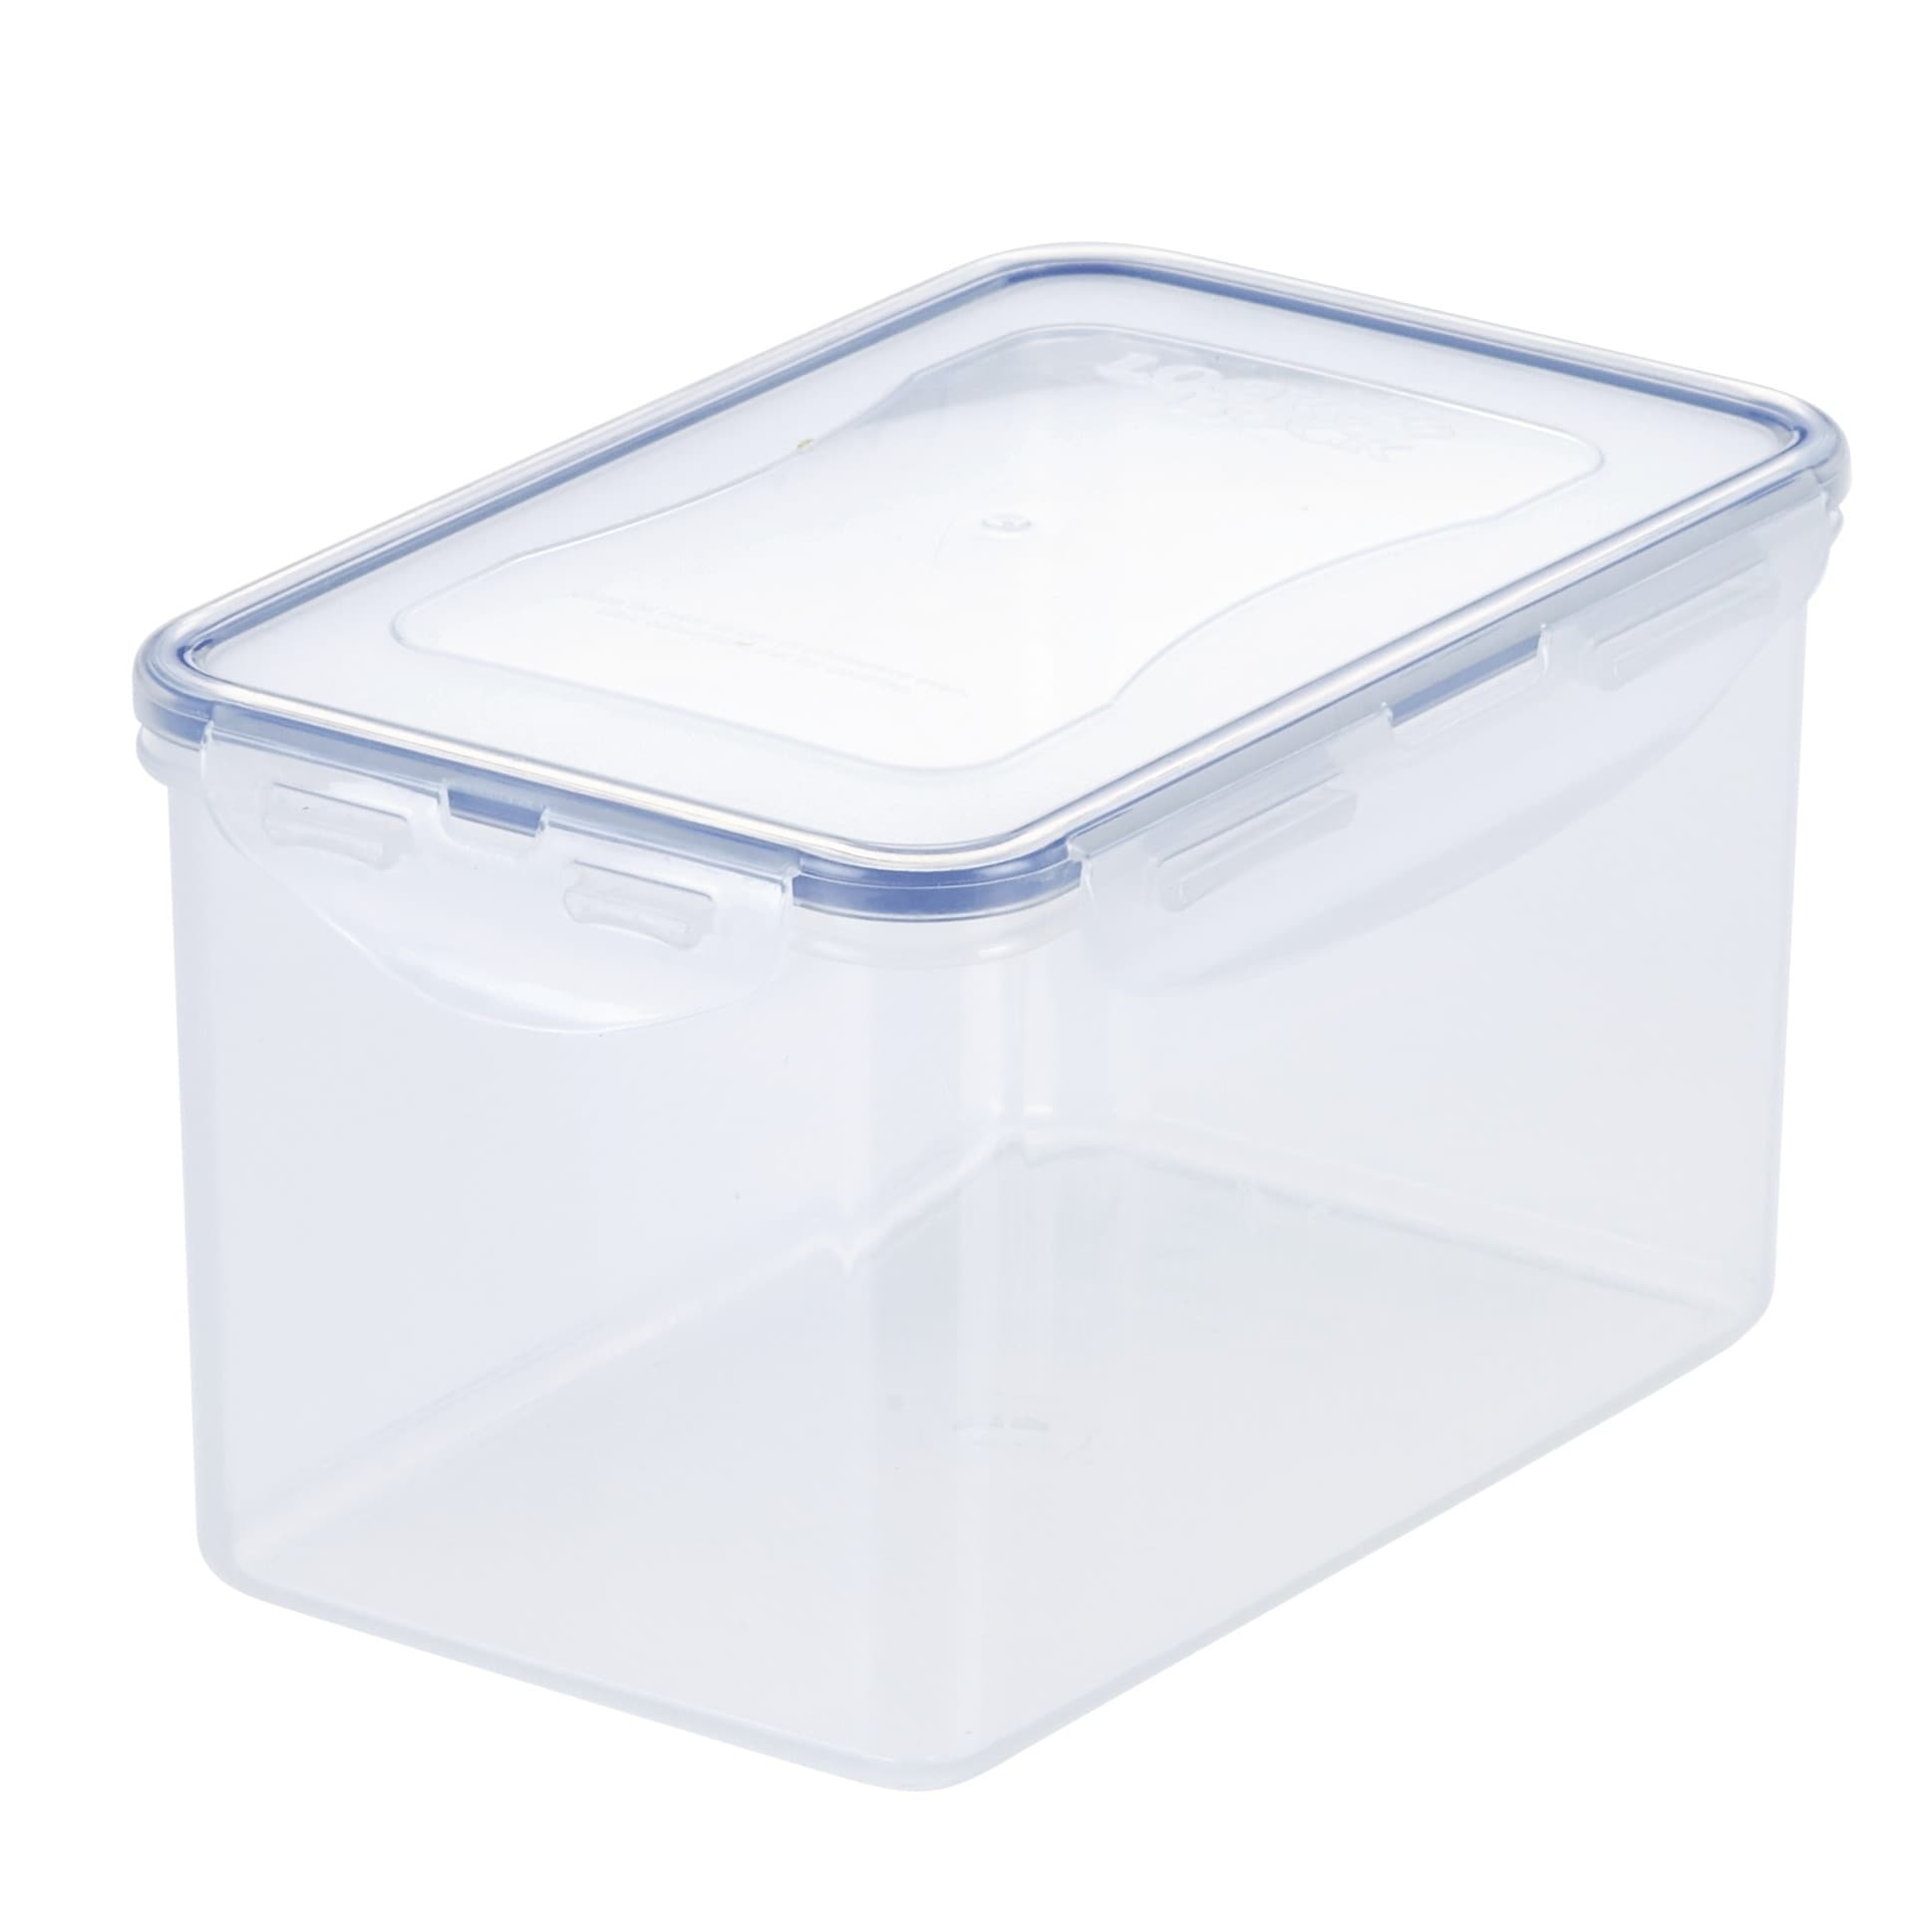 https://ak1.ostkcdn.com/images/products/29013397/Easy-Essentials-Pantry-Rectangular-Food-Storage-Container-8C-aa303232-c377-4b71-94ad-26651e290a96.jpg